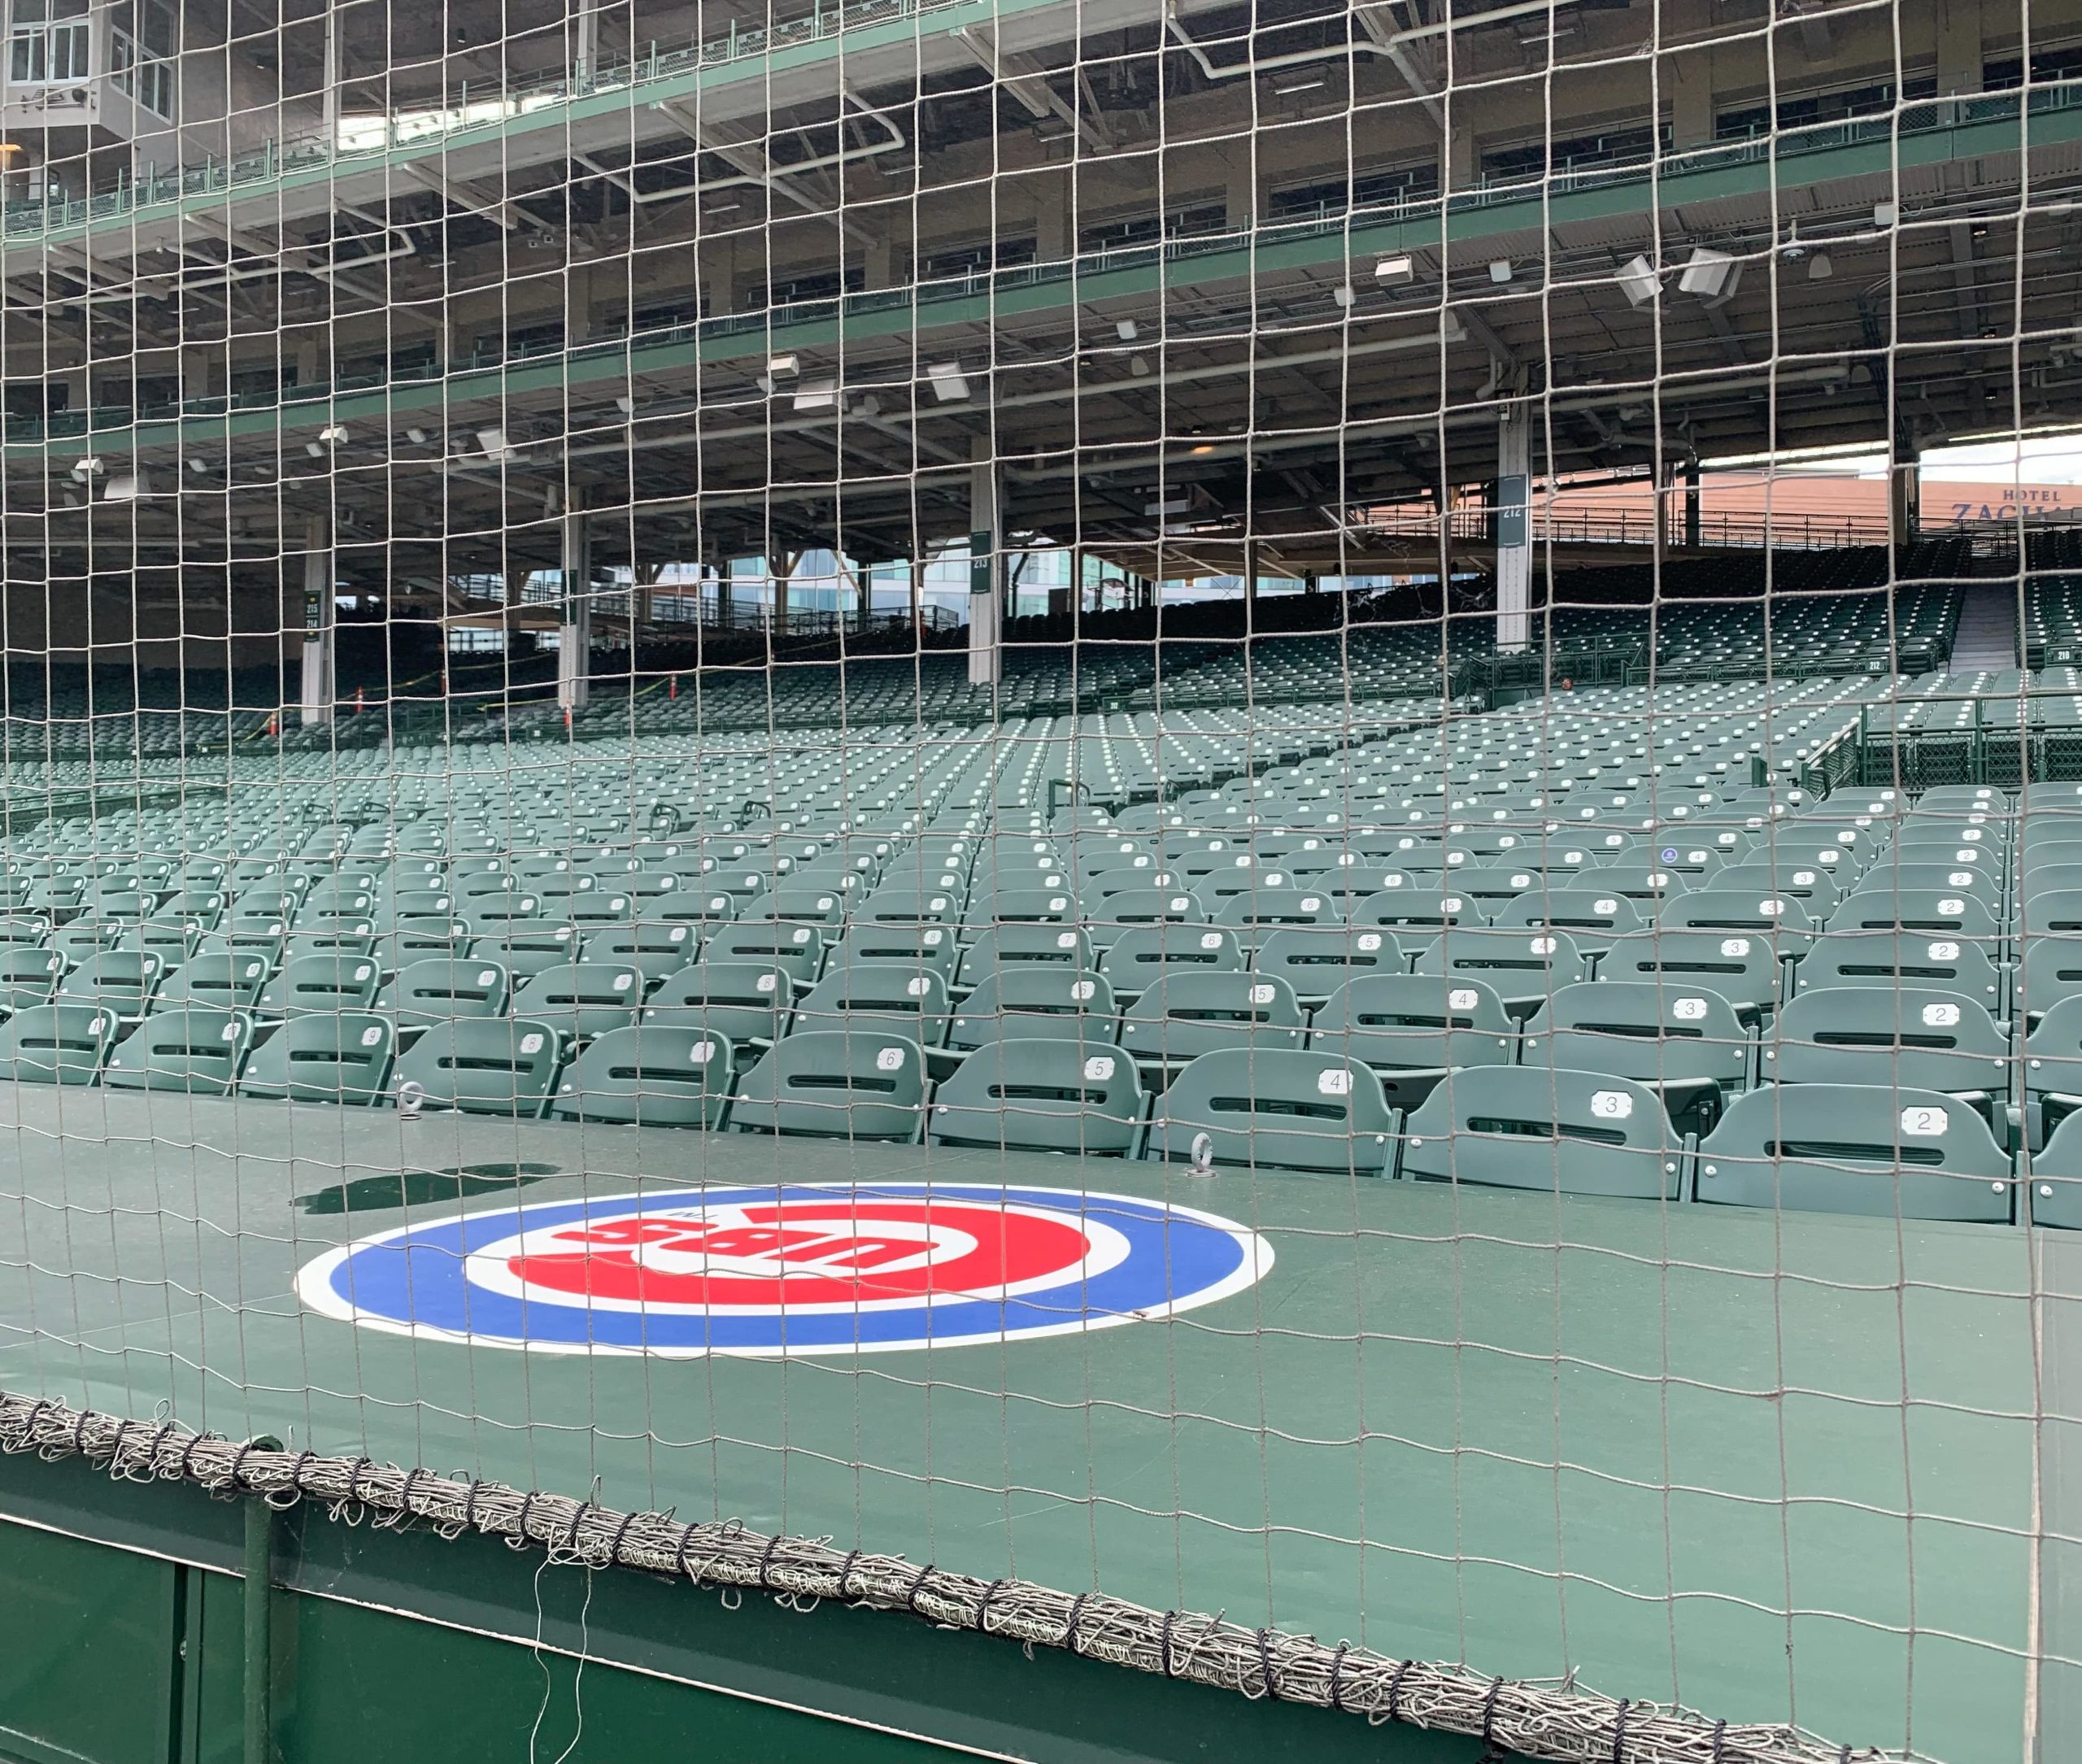 Chicago cubs dugout in Wrigley Field